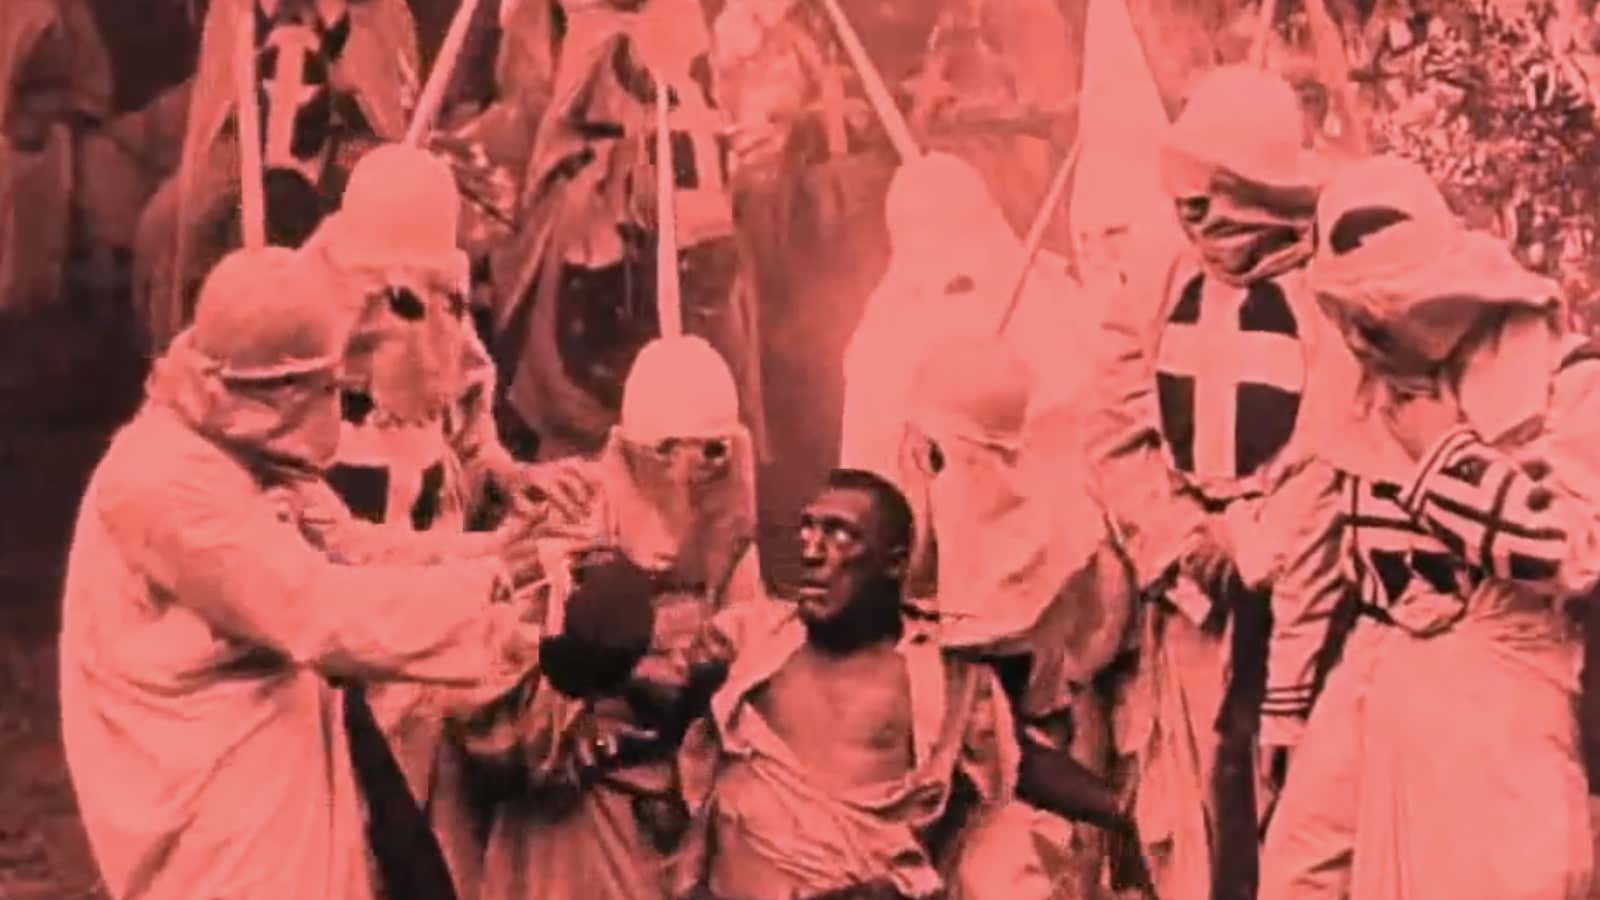 This incredibly racist film was the first movie ever to screen at the White House